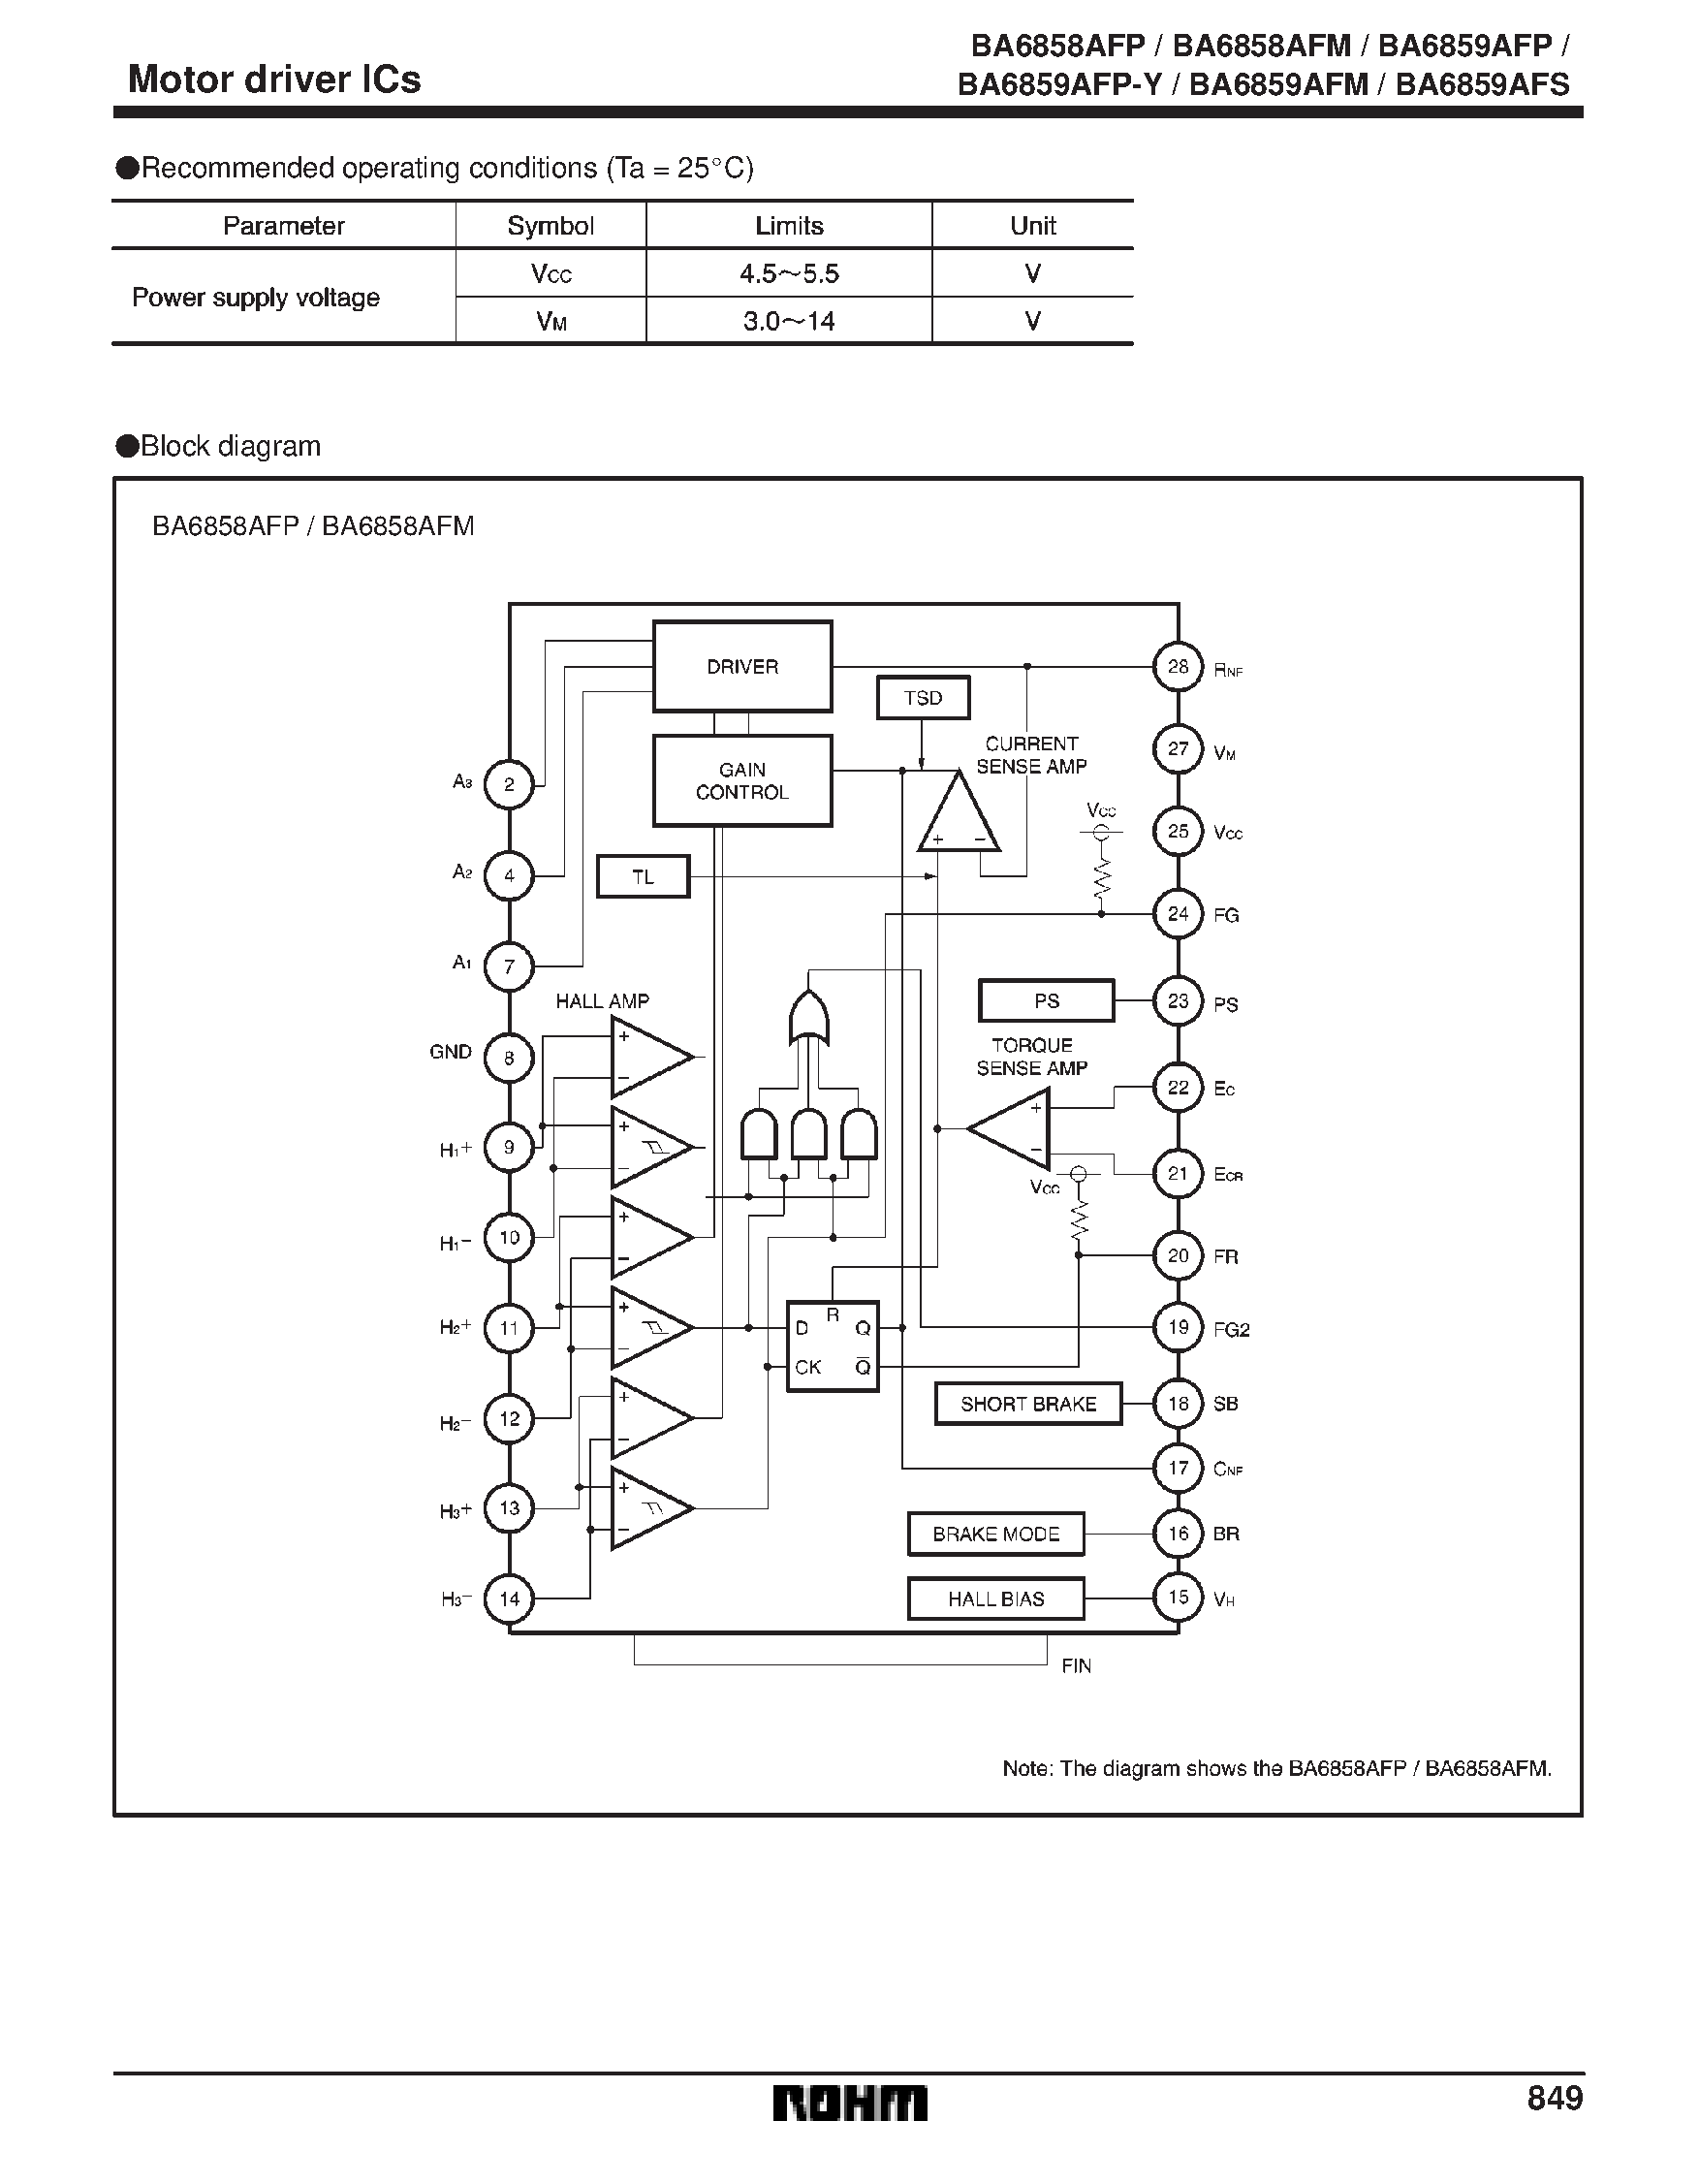 Datasheet BA6859AFP-Y - Three-phase motor driver for CD-ROMs page 2